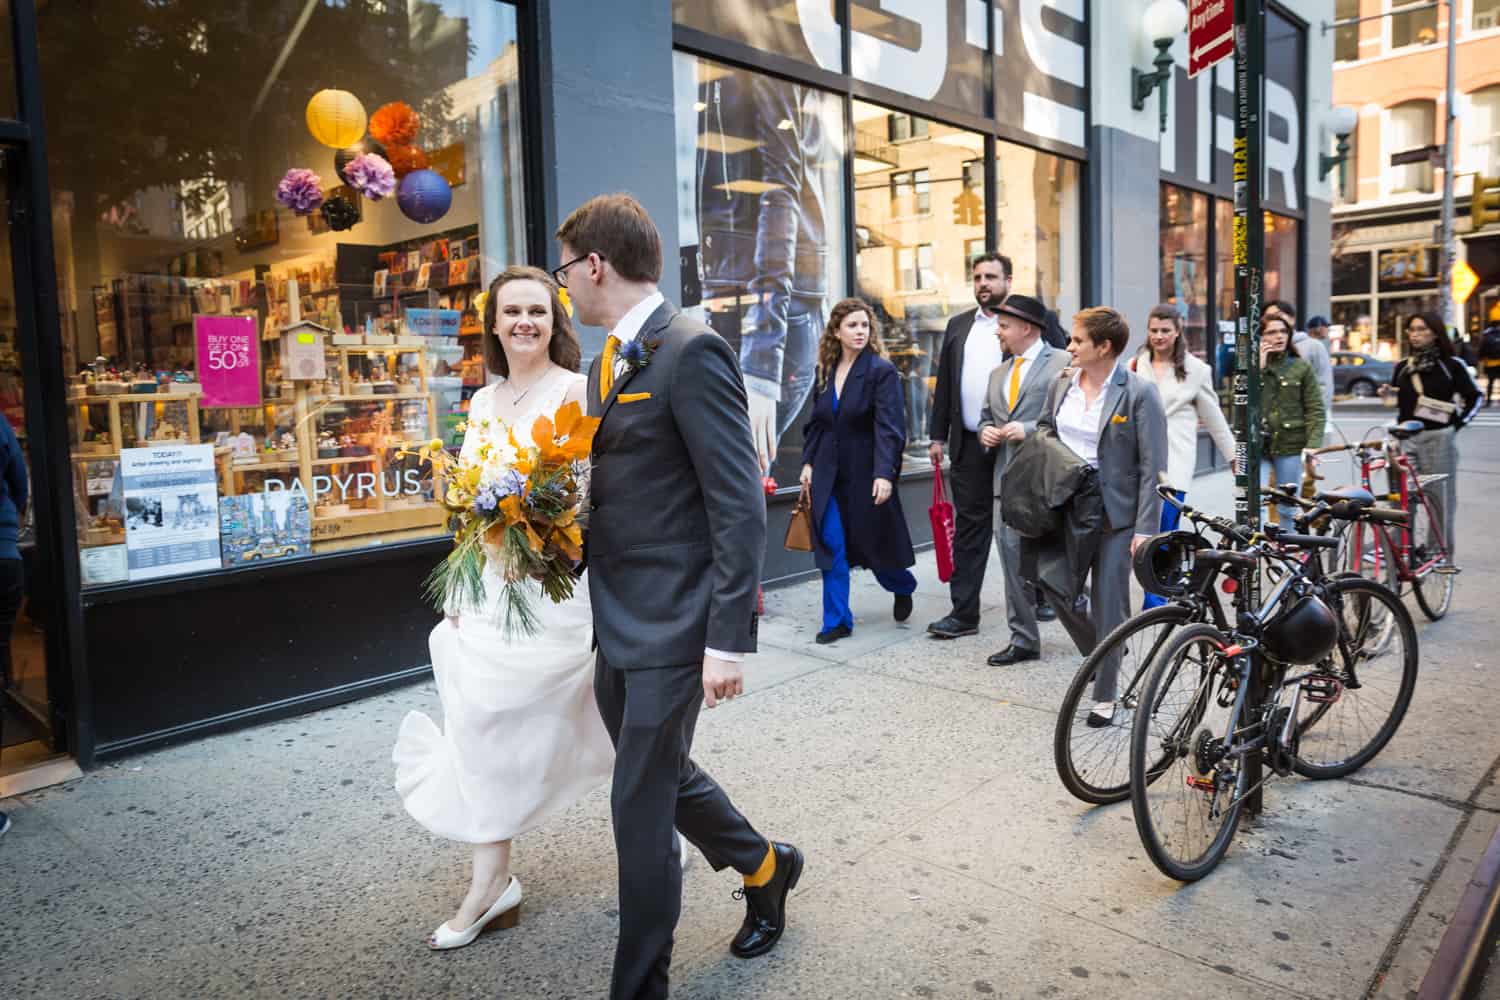 Bride and groom walking in front of bridal party on NYC sidewalk